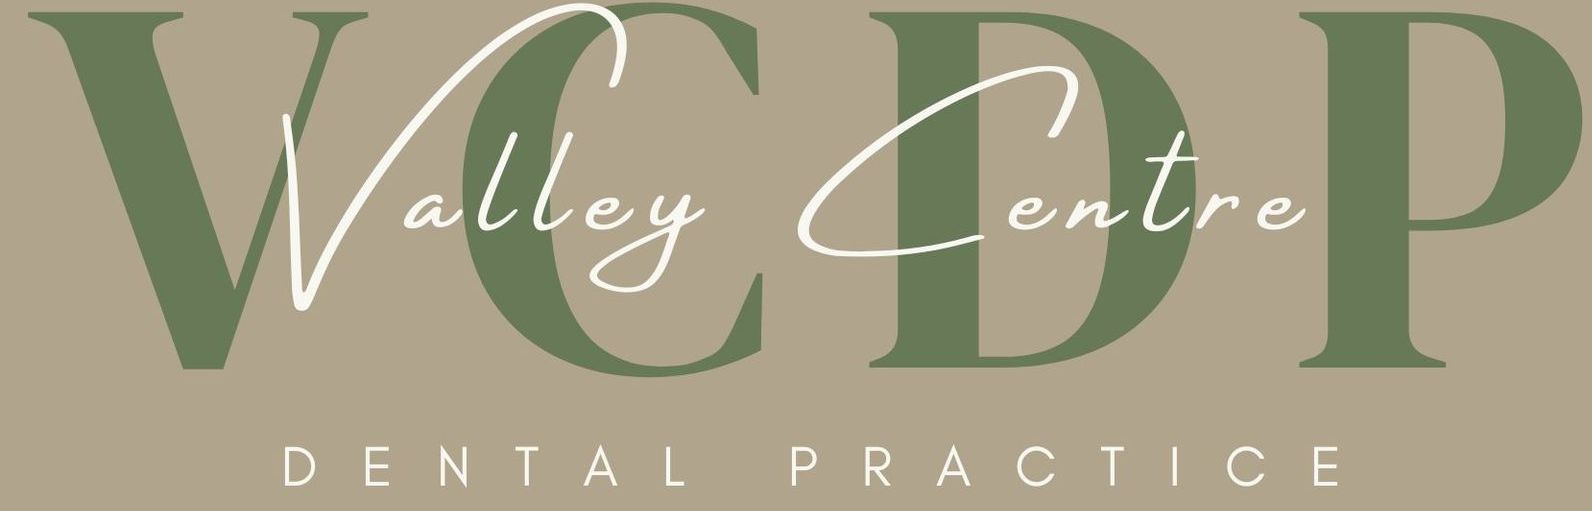 The Valley Centre Dental Practice & Implant Centre